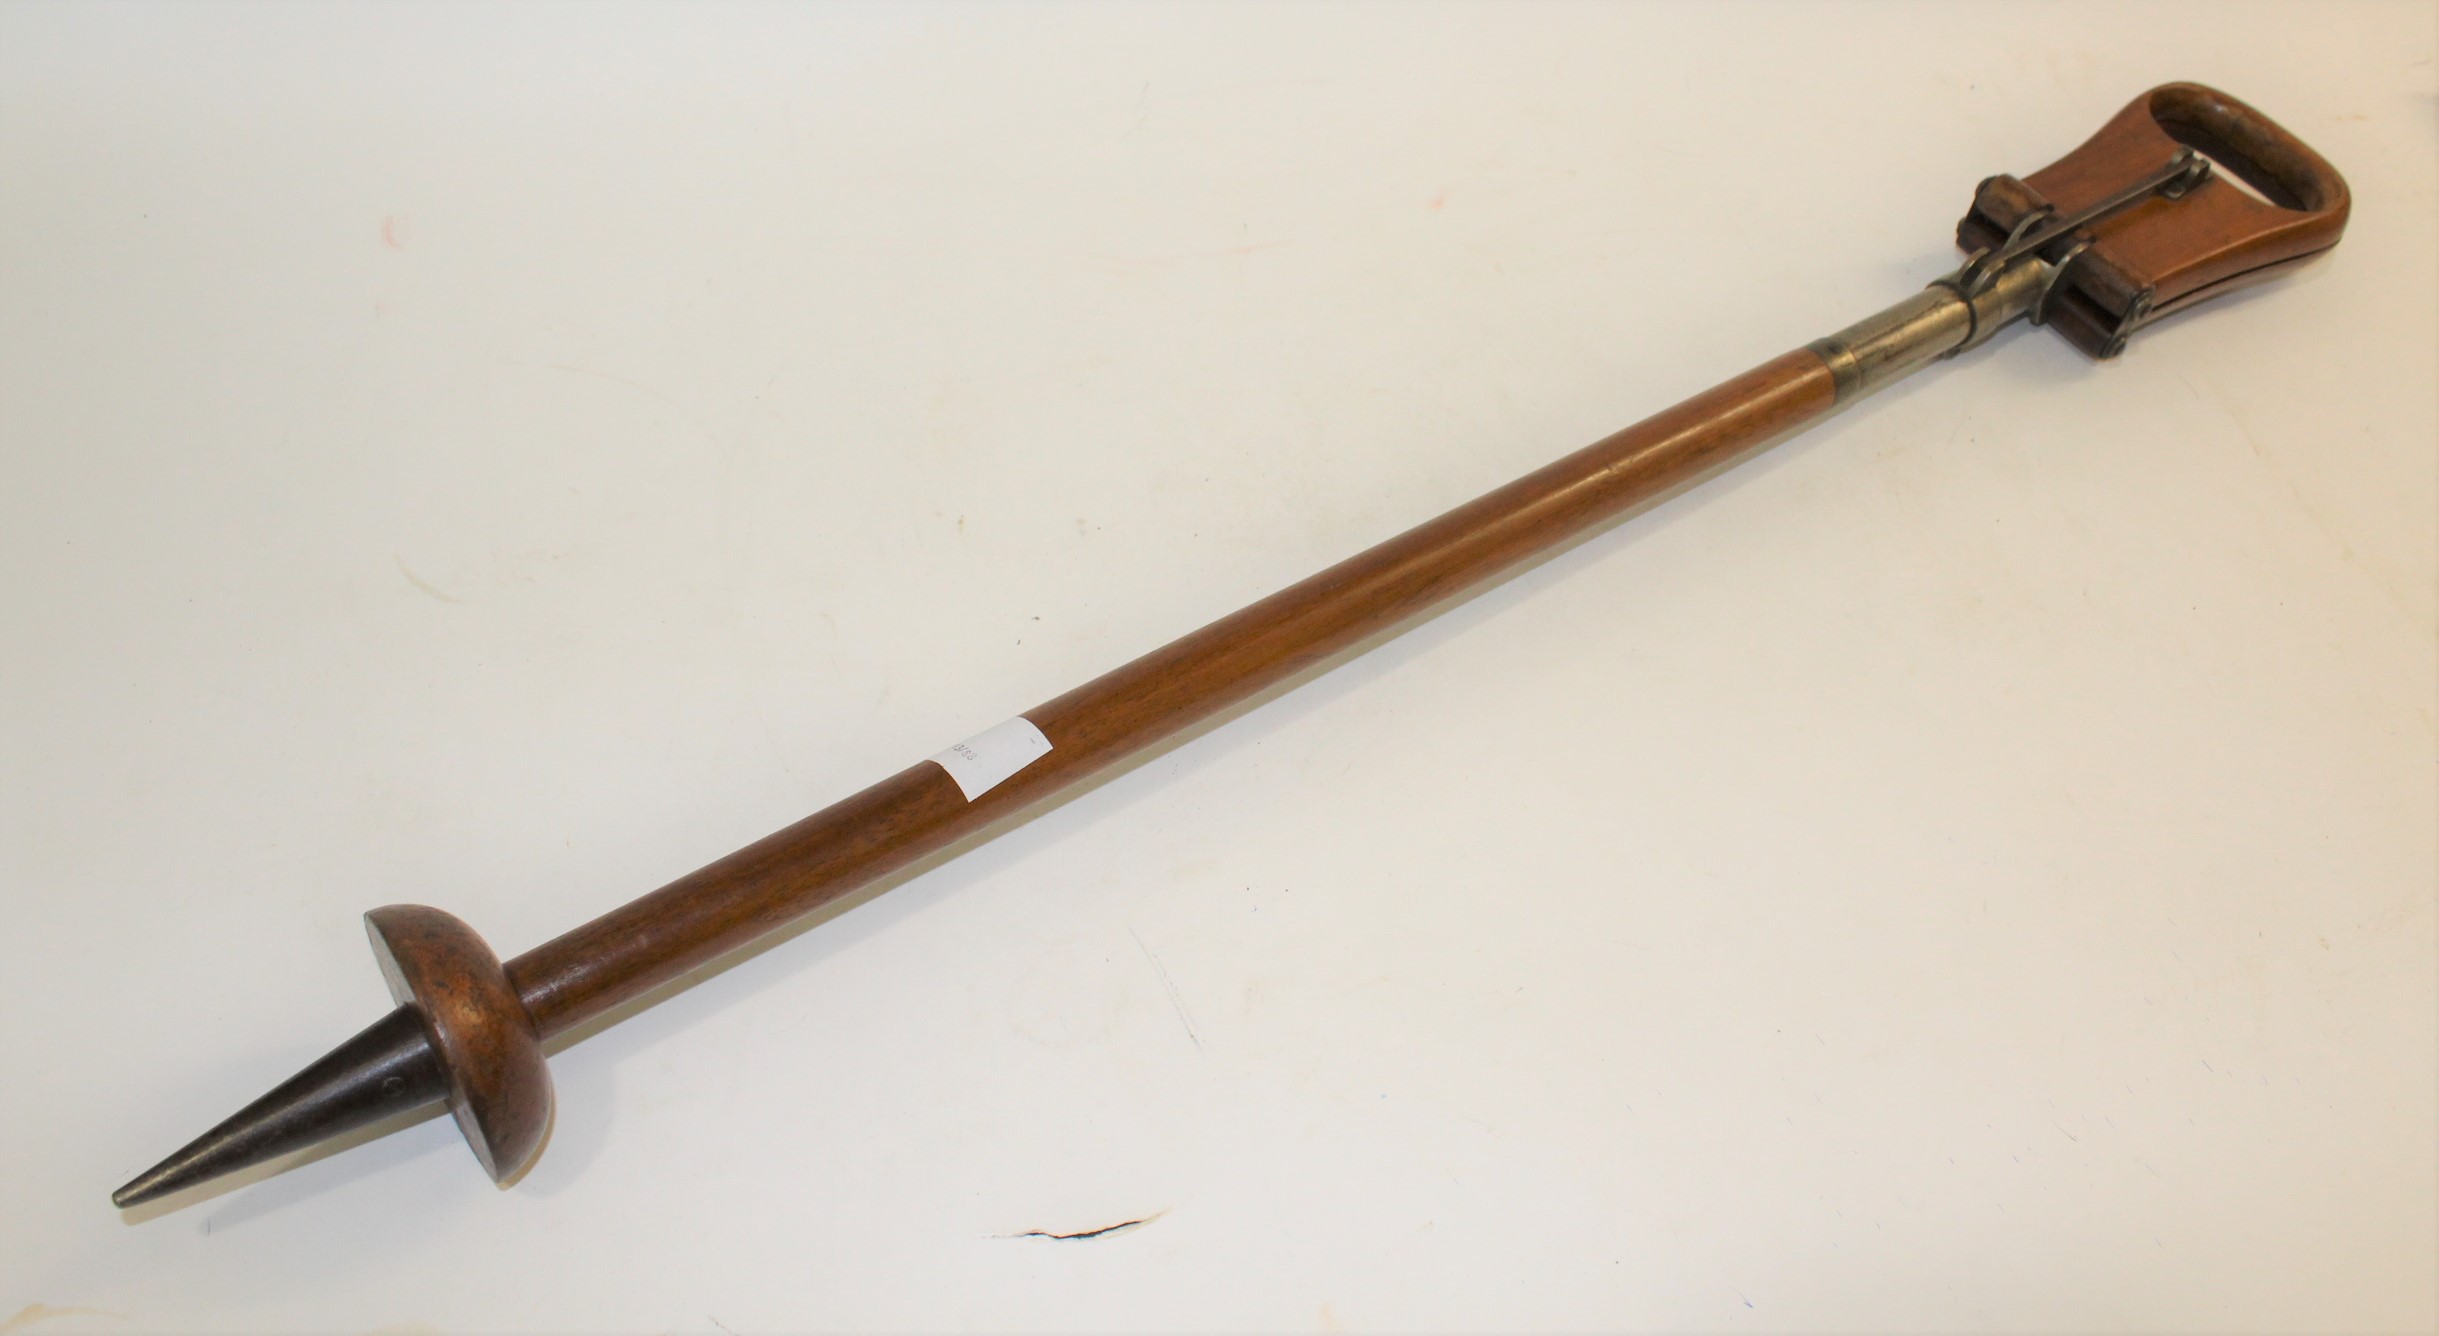 J PURDEY & SONS SHOOTING STICK with a mahogany folding seat, with a supporting mechanism, wooden - Image 2 of 3